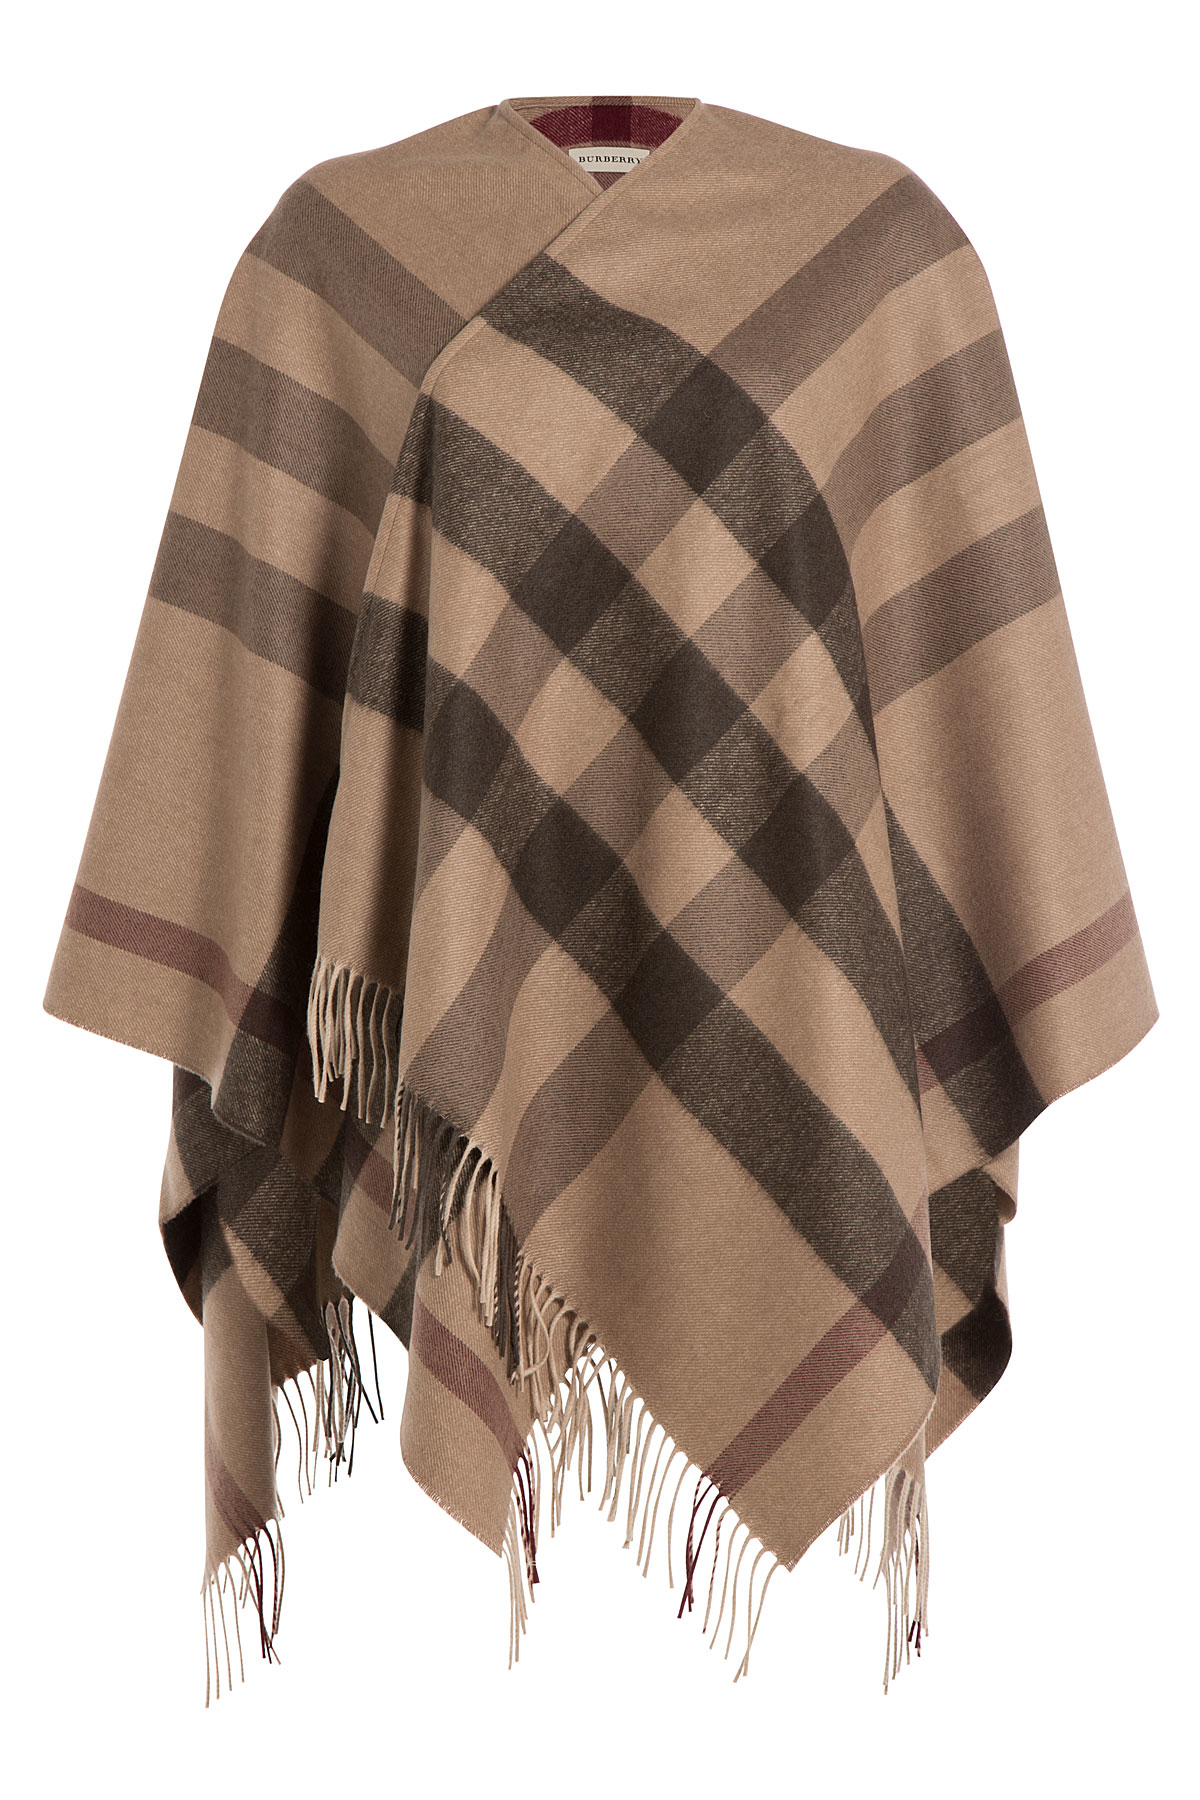 Lyst - Burberry Printed Cashmere-merino Wool Cape - Multicolor in Brown